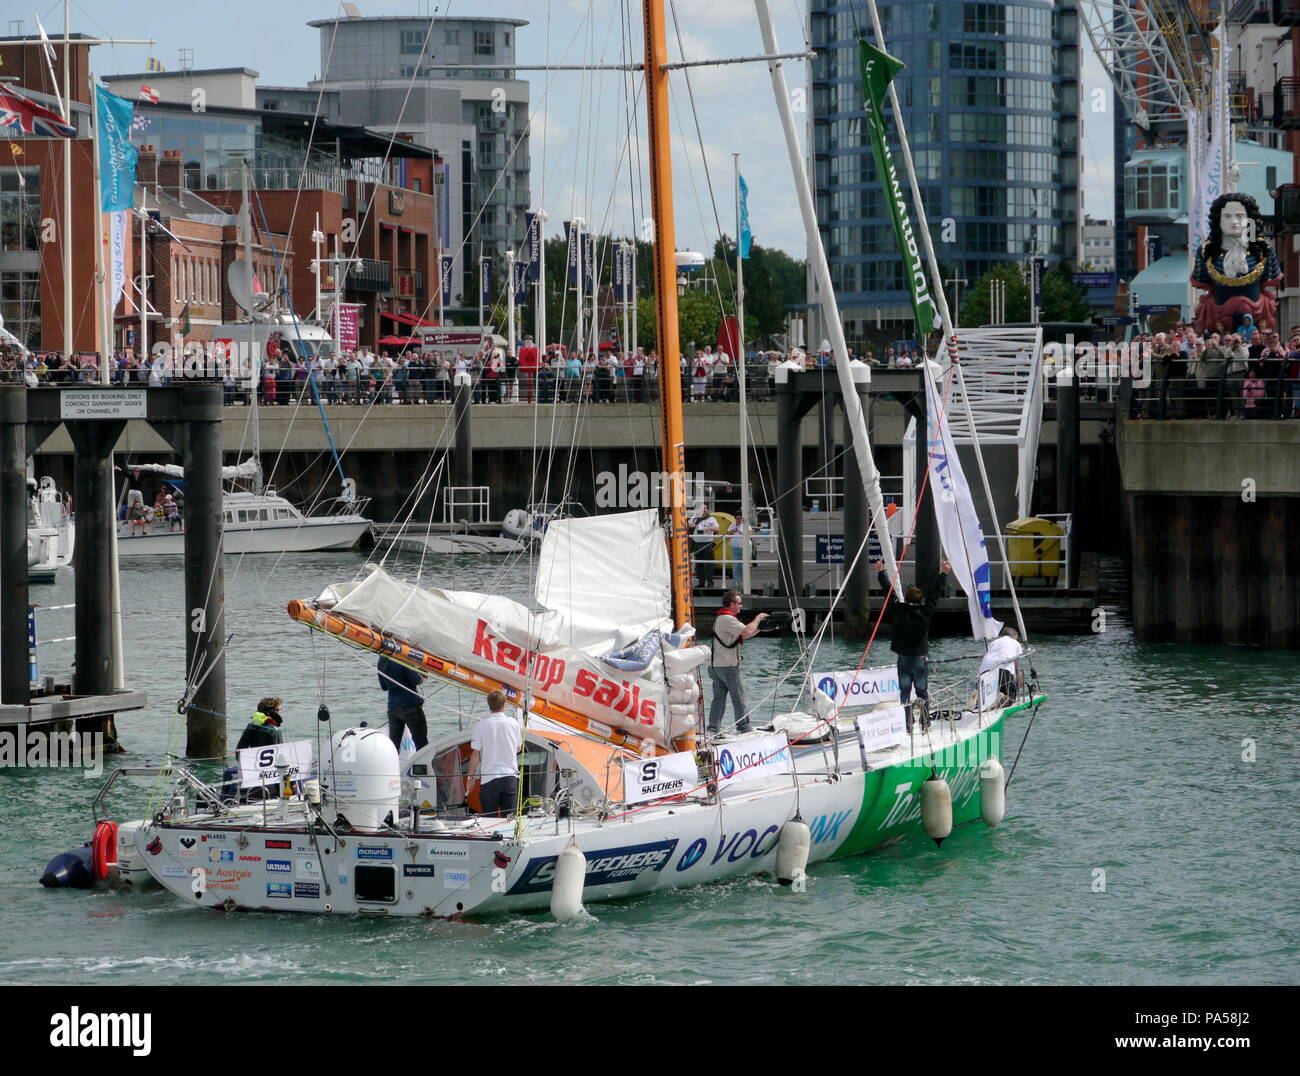 AJAXNETPHOTO. 29TH AUGUST, 2009. PORTSMOUTH, ENGLAND. - YOUNGEST  CIRCUMNAVIGATOR - MIKE PERHAM, 17 YEAR OLD BRITISH SAILOR FROM POTTERS BAR,  ARRIVES AT GUNWHARF QUAY IN HIS 50 FT YACHT TOTALLYMONEY.COM AFTER BECOMING